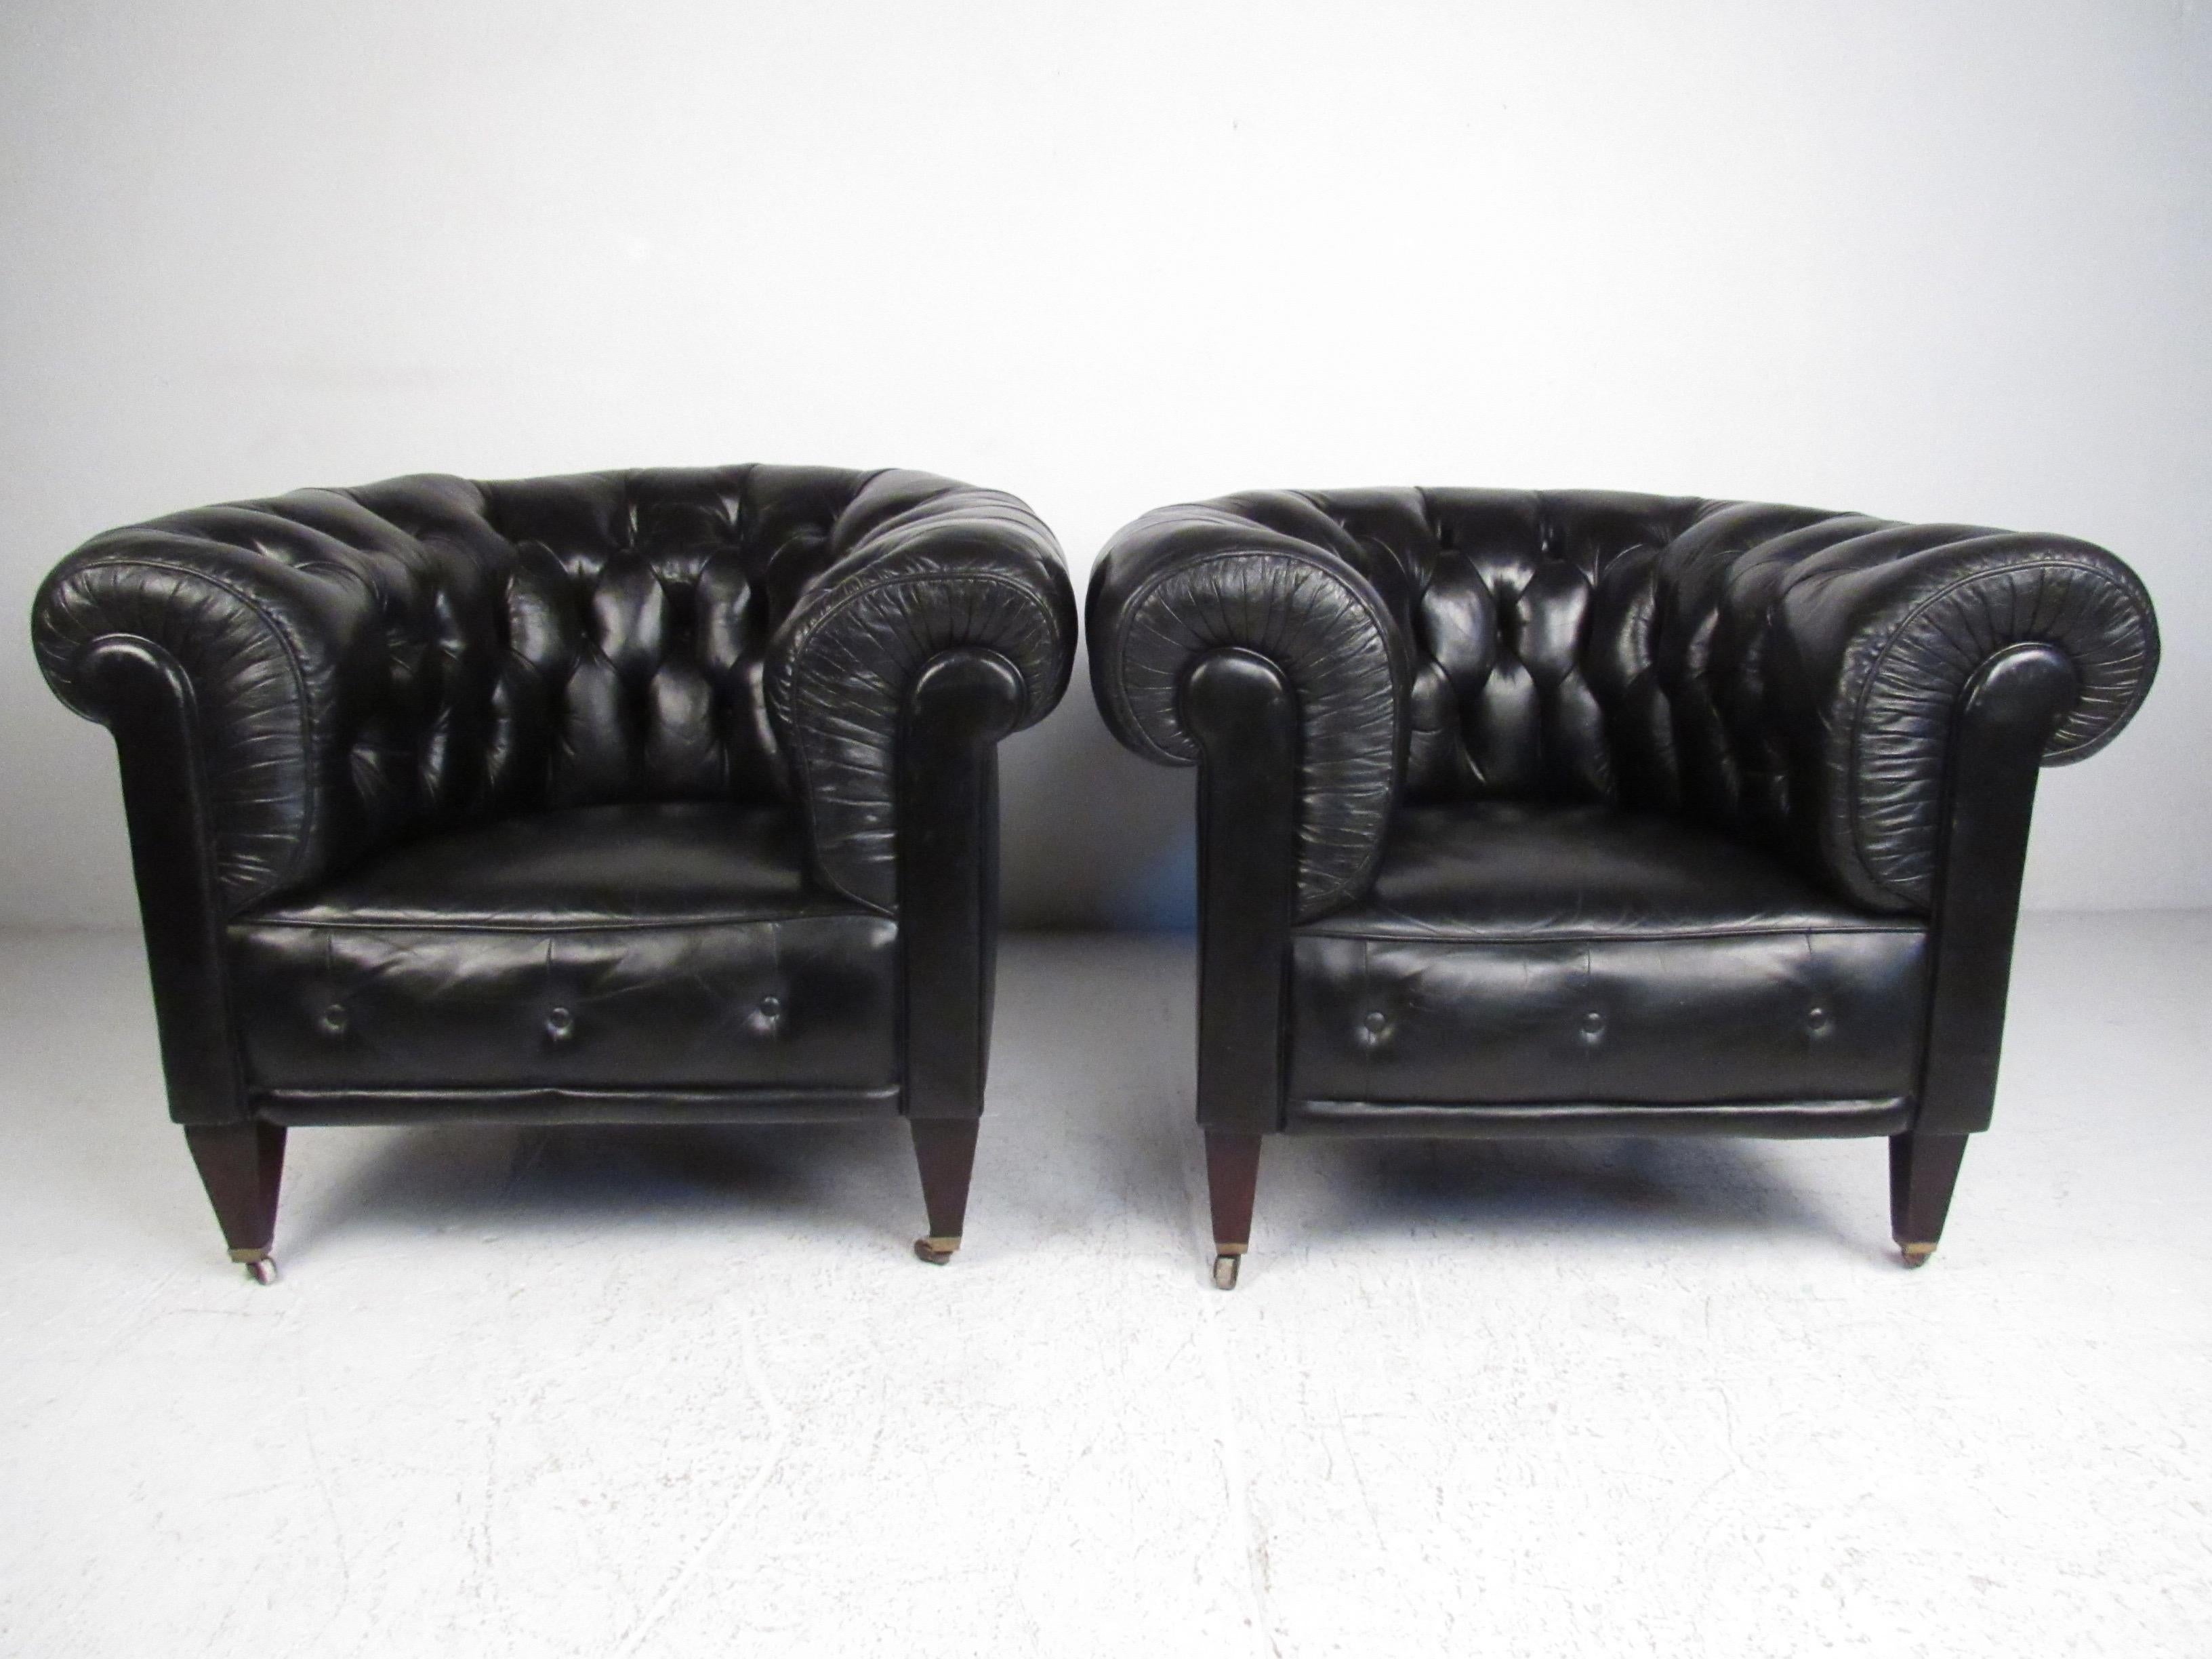 This gorgeous matching set of black leather club chairs make an impressive chesterfield style addition to home or business seating. Generous proportions, thick scrolled arms, and comfortable tufted upholstery add to the vintage charm and timeless